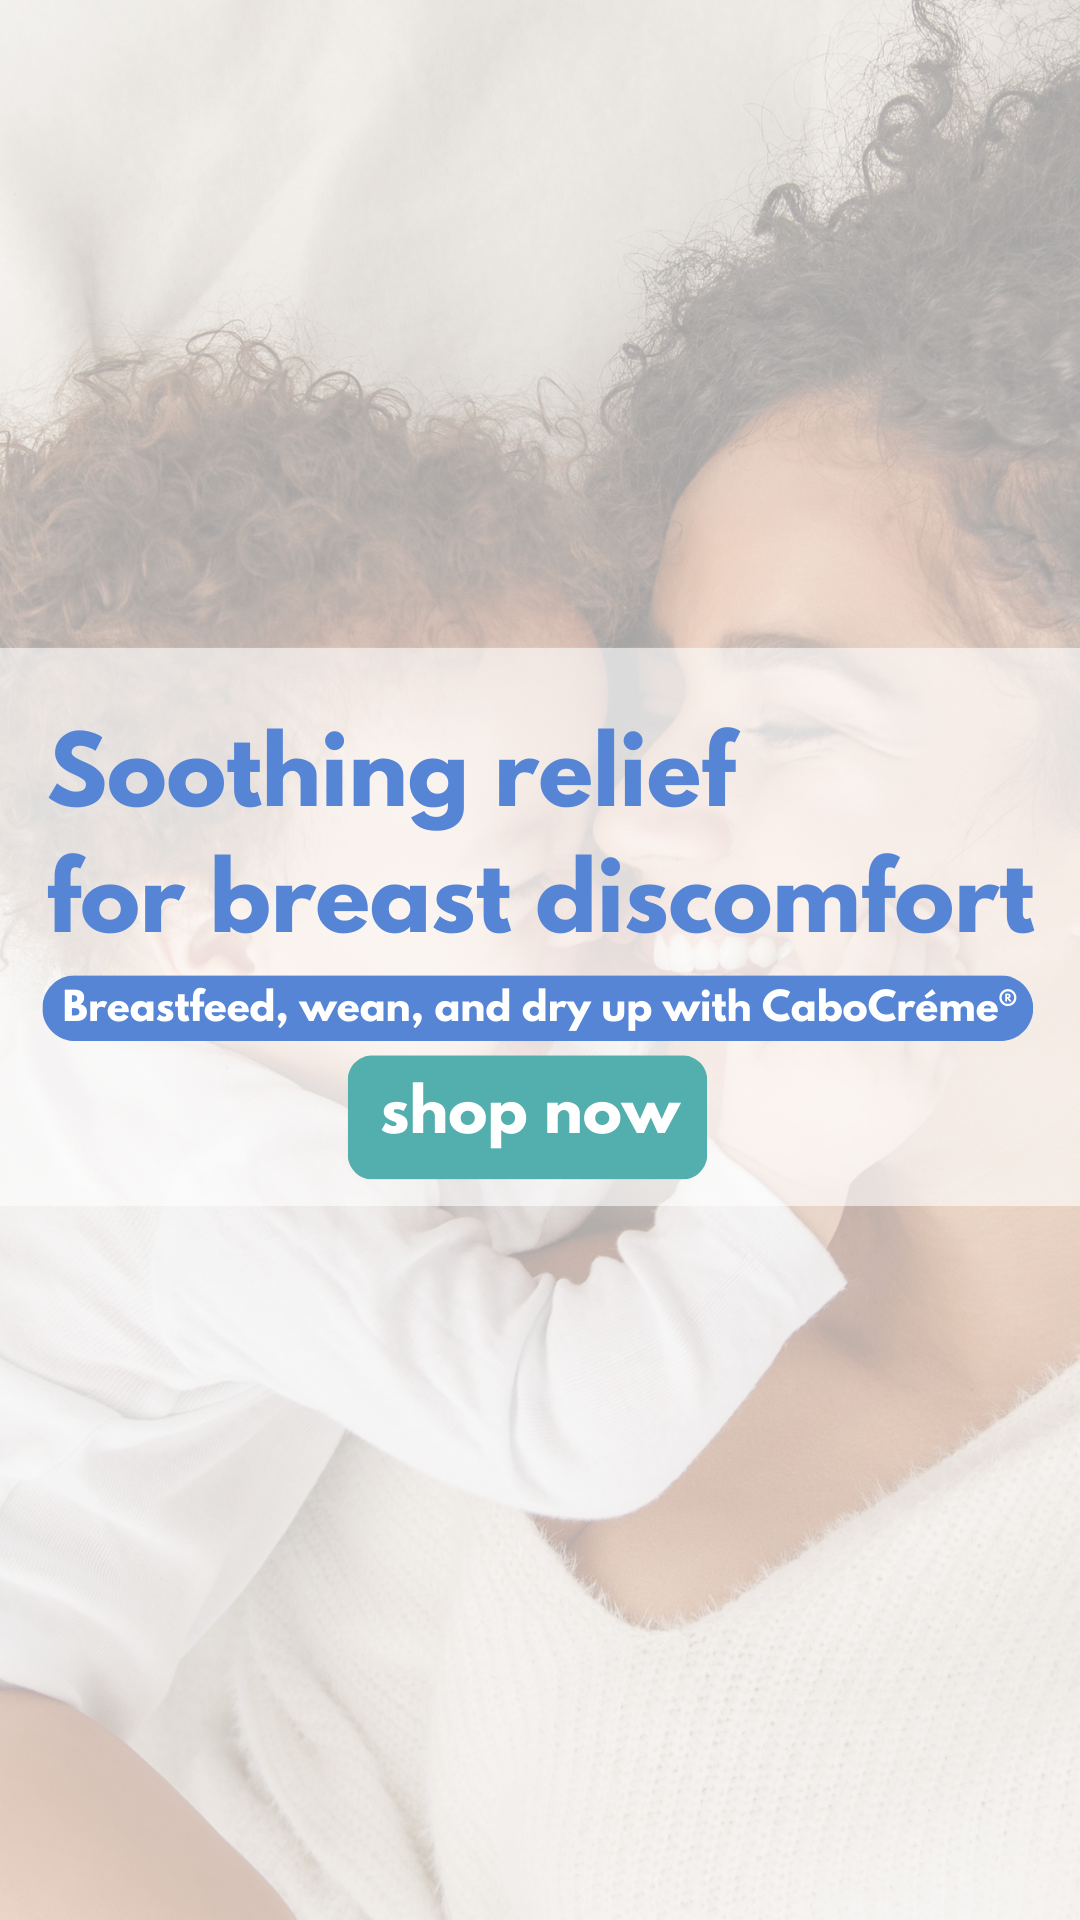 stop breastfeeding, clogged ducts, weaning